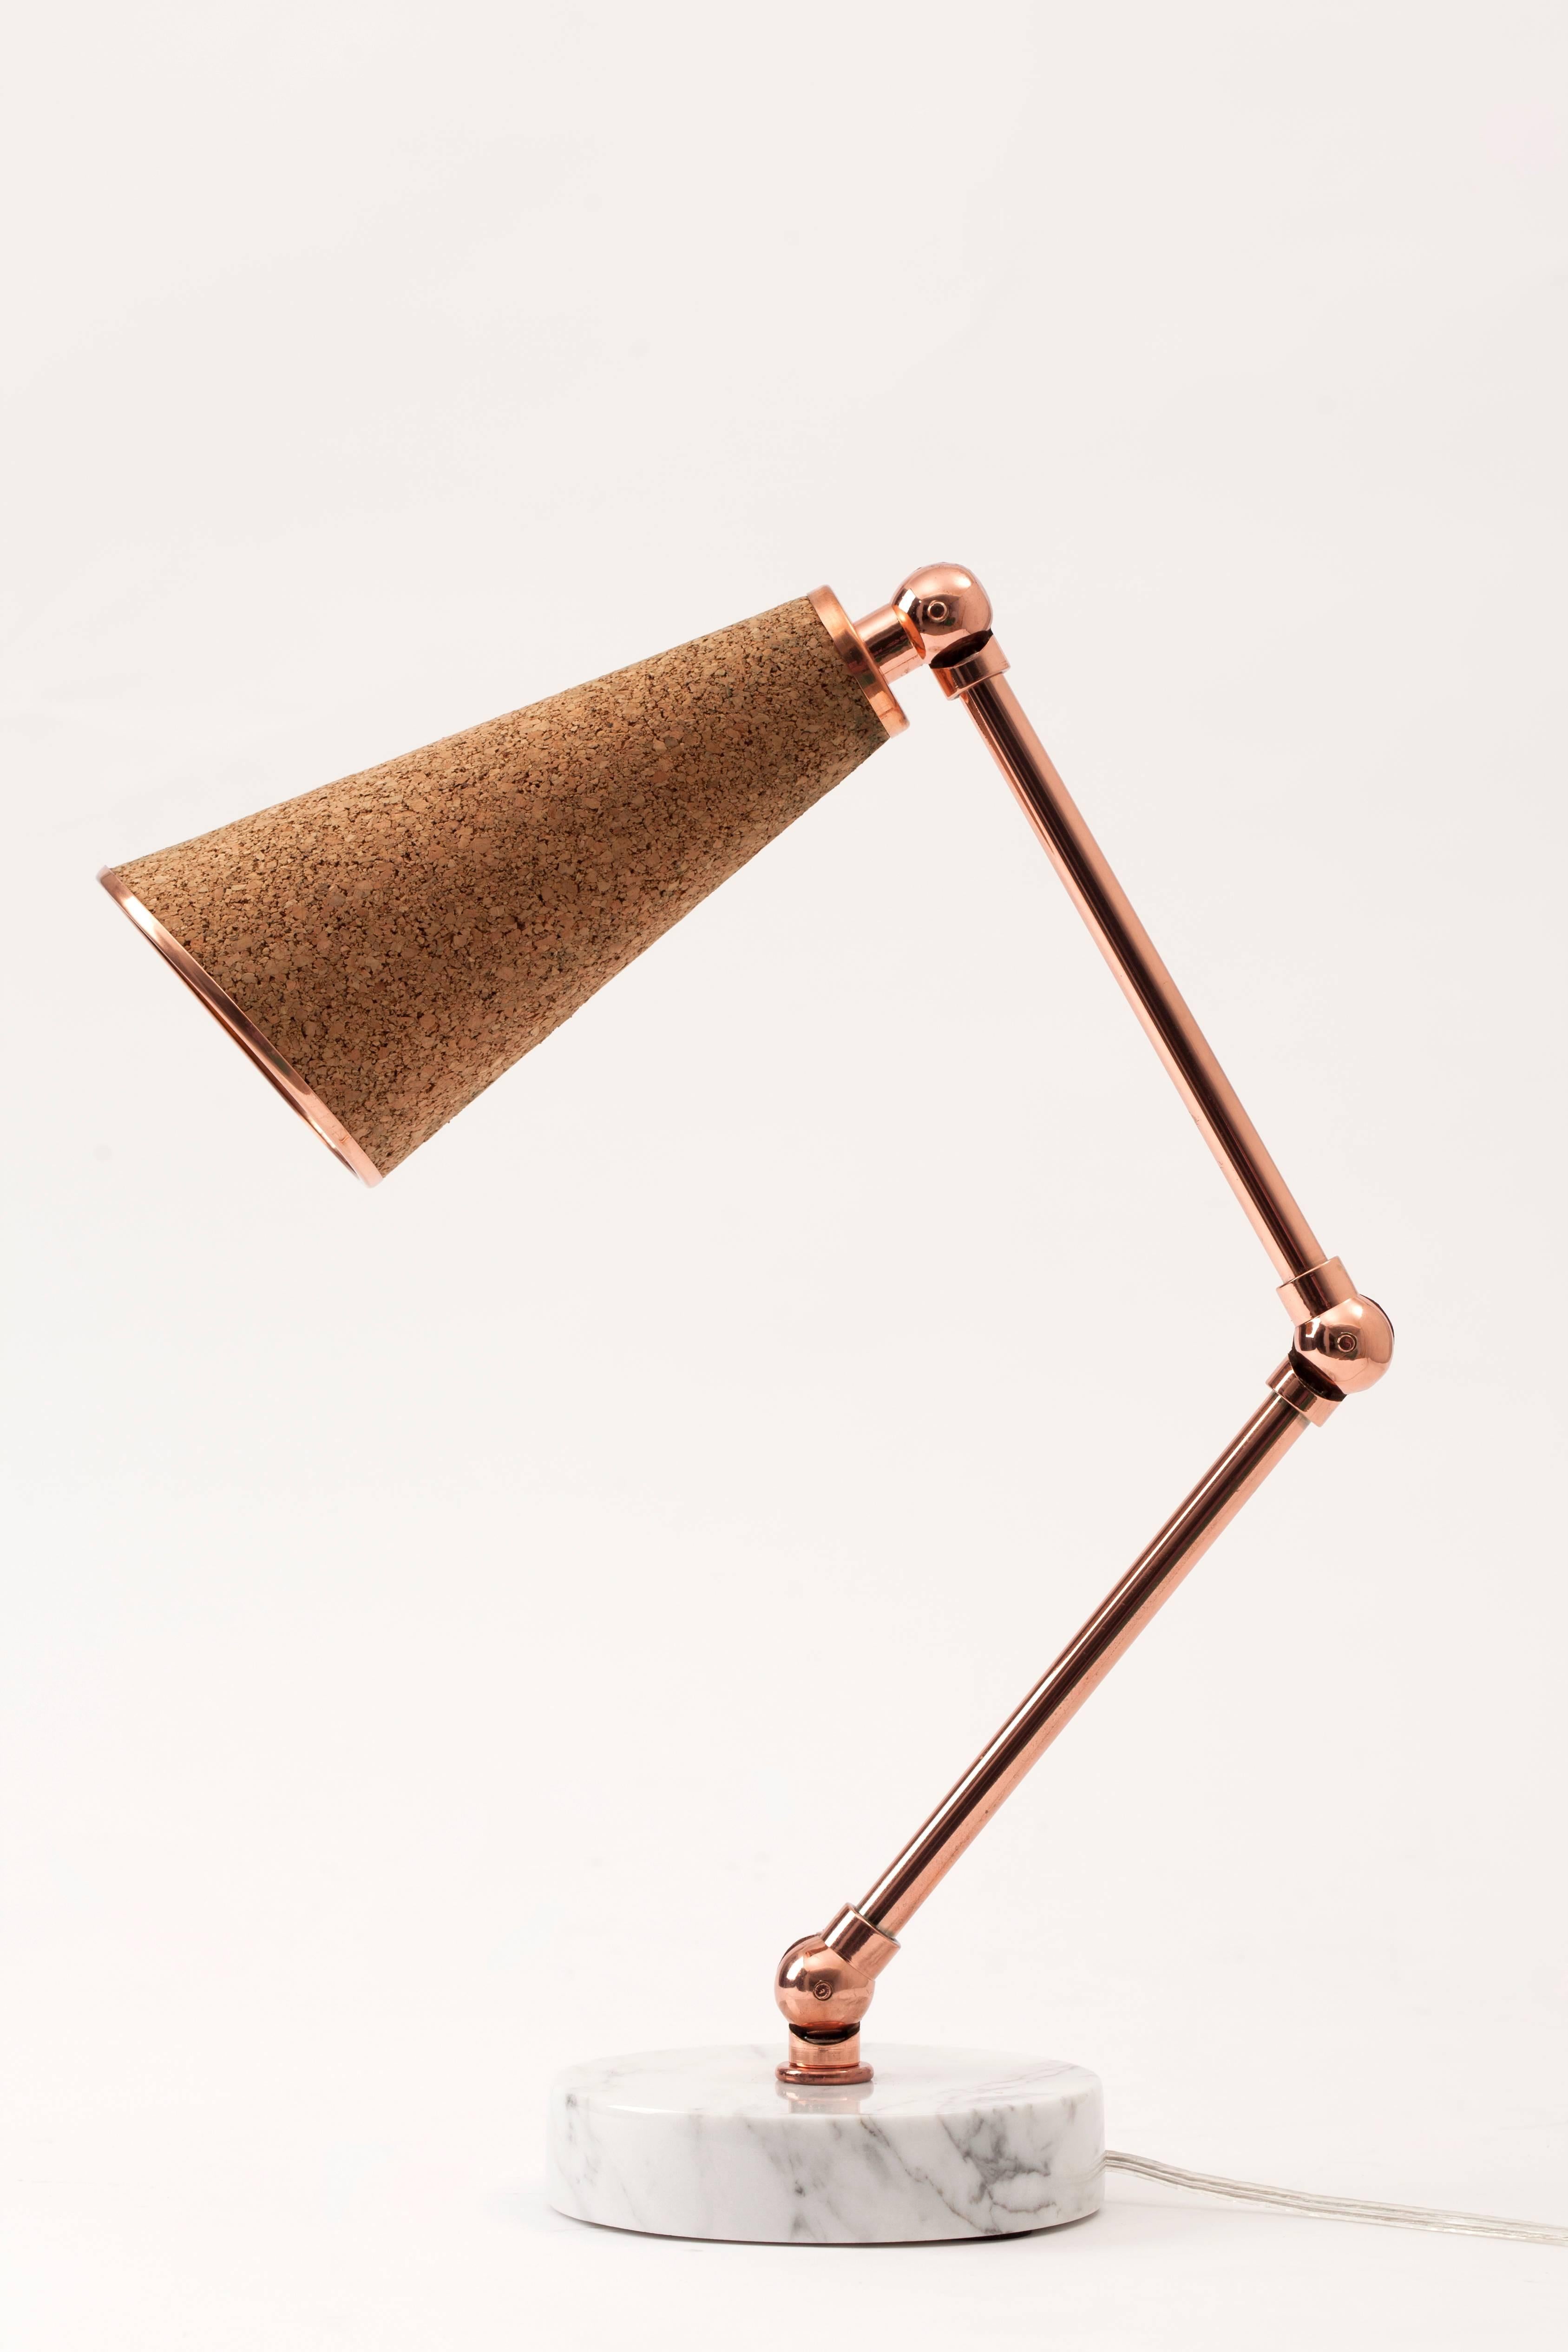 Contemporary Lanterna Table Lamp in Carrara Marble, Cowhide and Copper with Adjustable Arms  For Sale